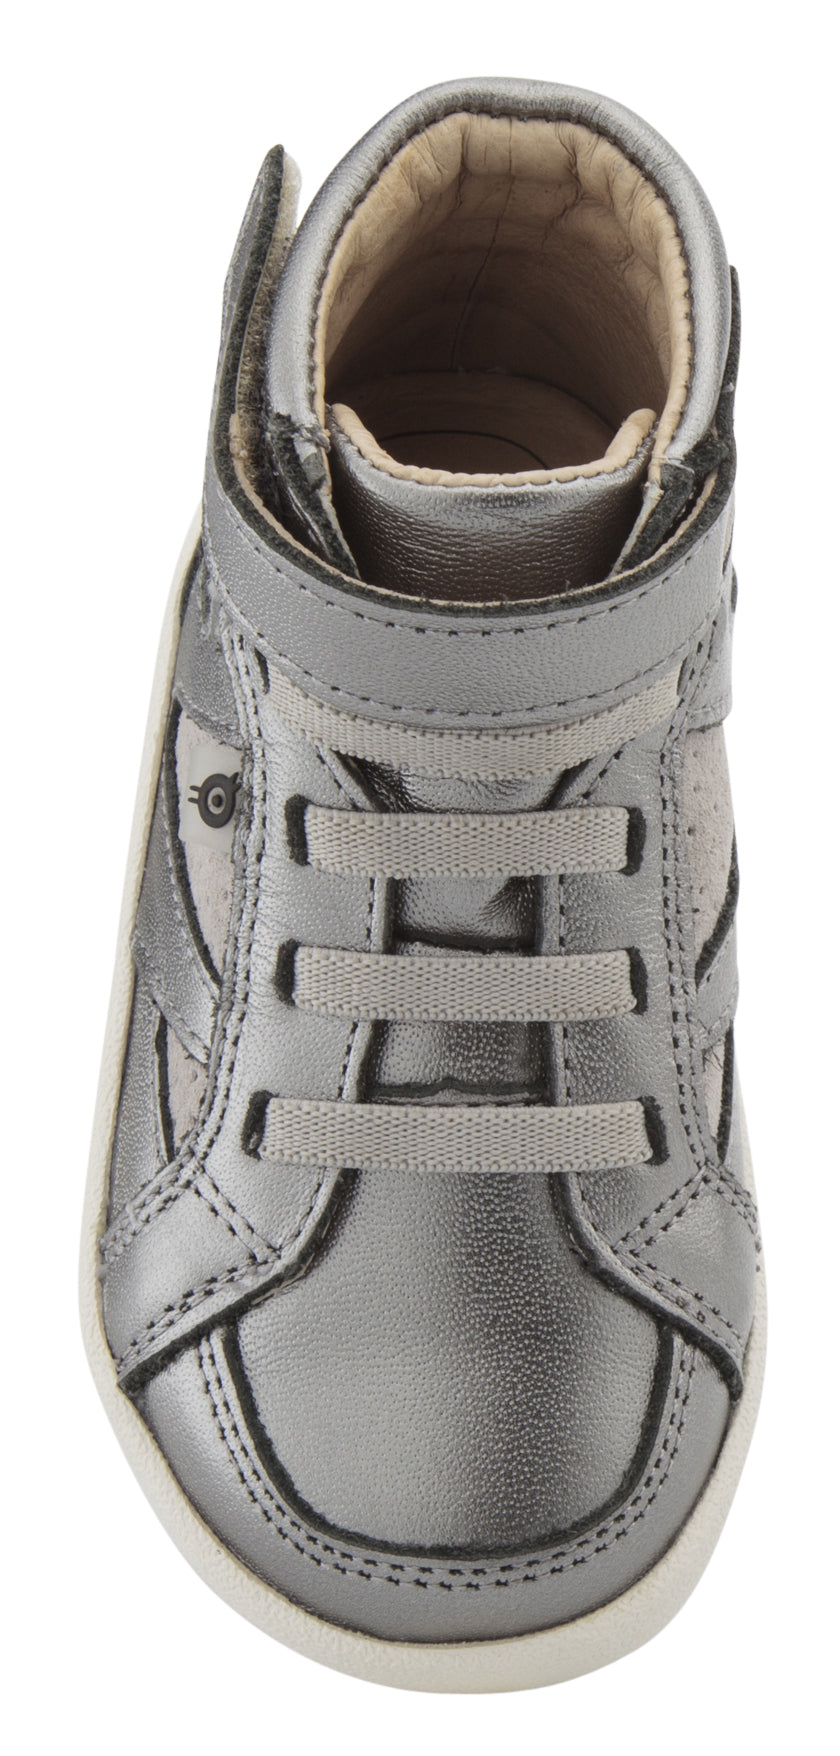 Old Soles Girl's & Boy's New Leader Sneakers - Rich Silver/Grey Suede